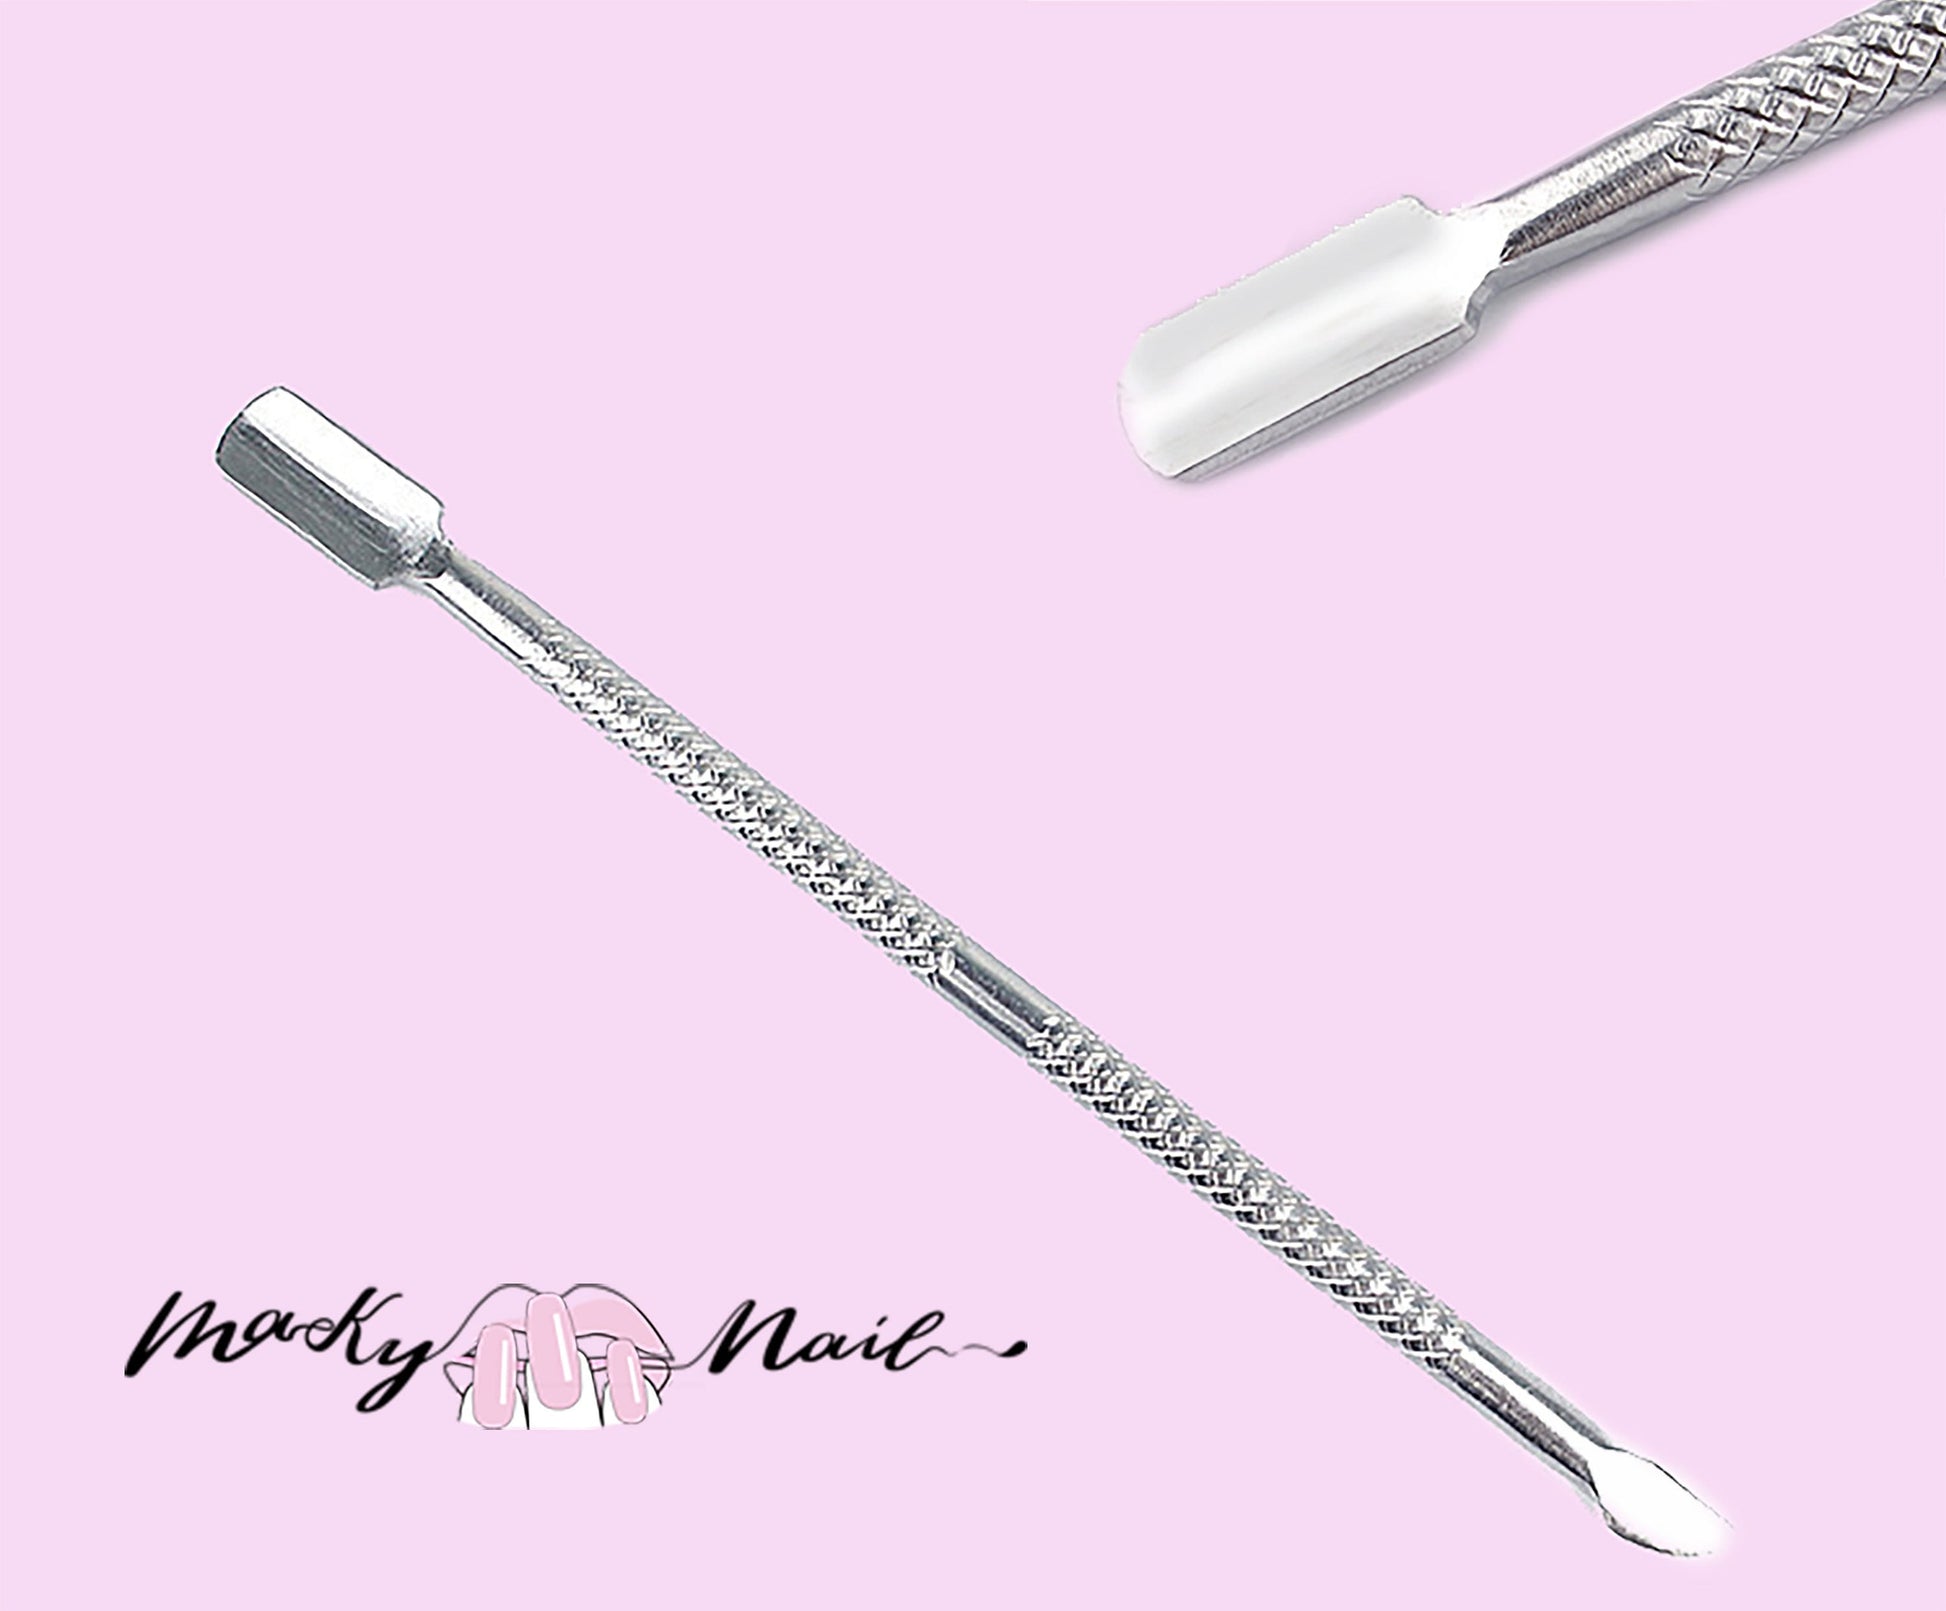 MUST have 1pc Stainless Steel Cuticle Remover/ Double Sided Finger Dead Skin Push/ Nail Cuticle Pusher Manicure Care Tool Scraper